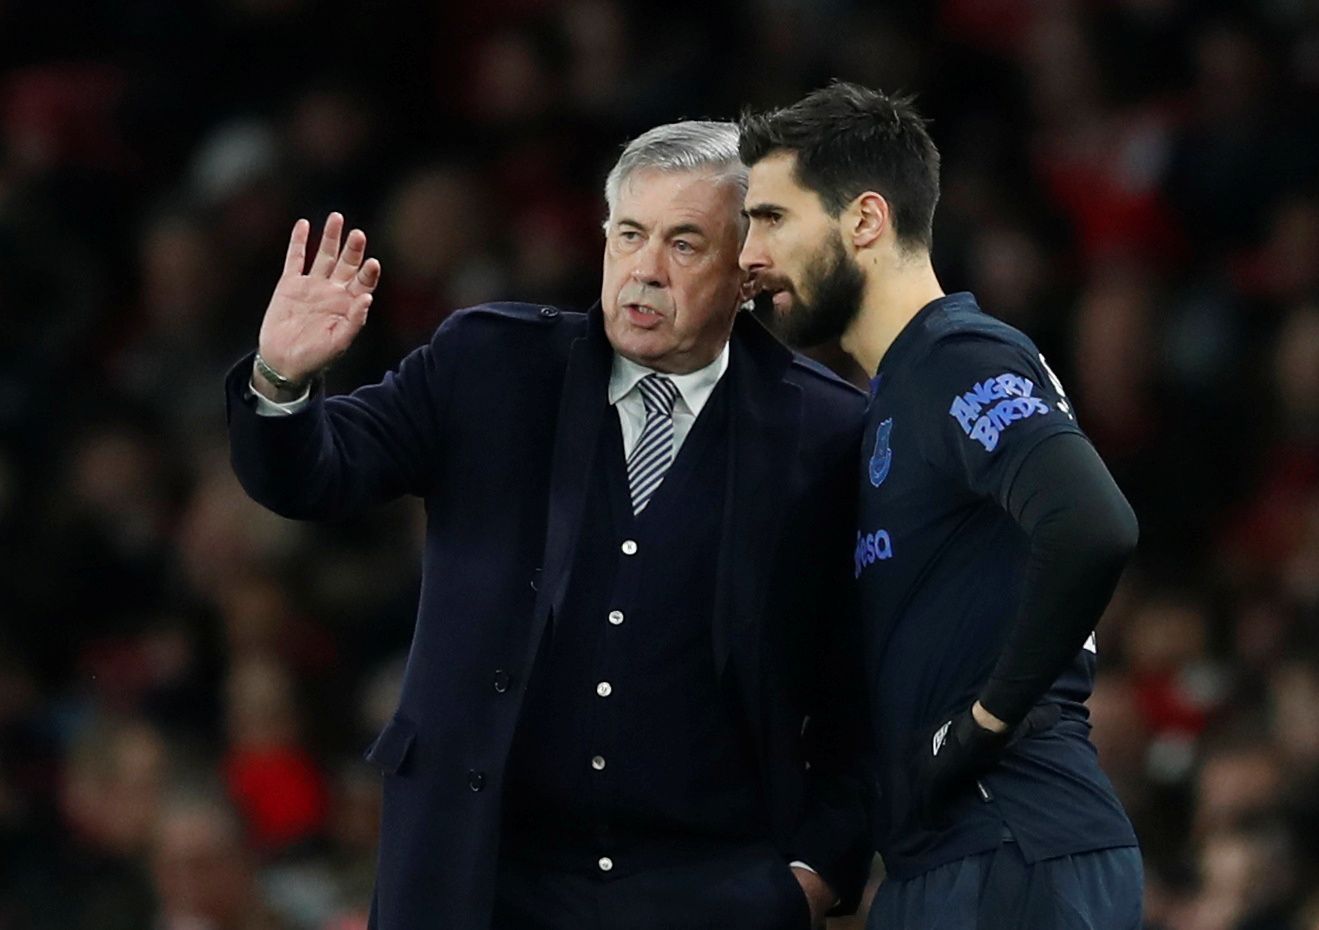 Soccer Football - Premier League - Arsenal v Everton - Emirates Stadium, London, Britain - February 23, 2020  Everton's Andre Gomes receives instructions from manager Carlo Ancelotti before being substituted on REUTERS/David Klein  EDITORIAL USE ONLY. No use with unauthorized audio, video, data, fixture lists, club/league logos or 